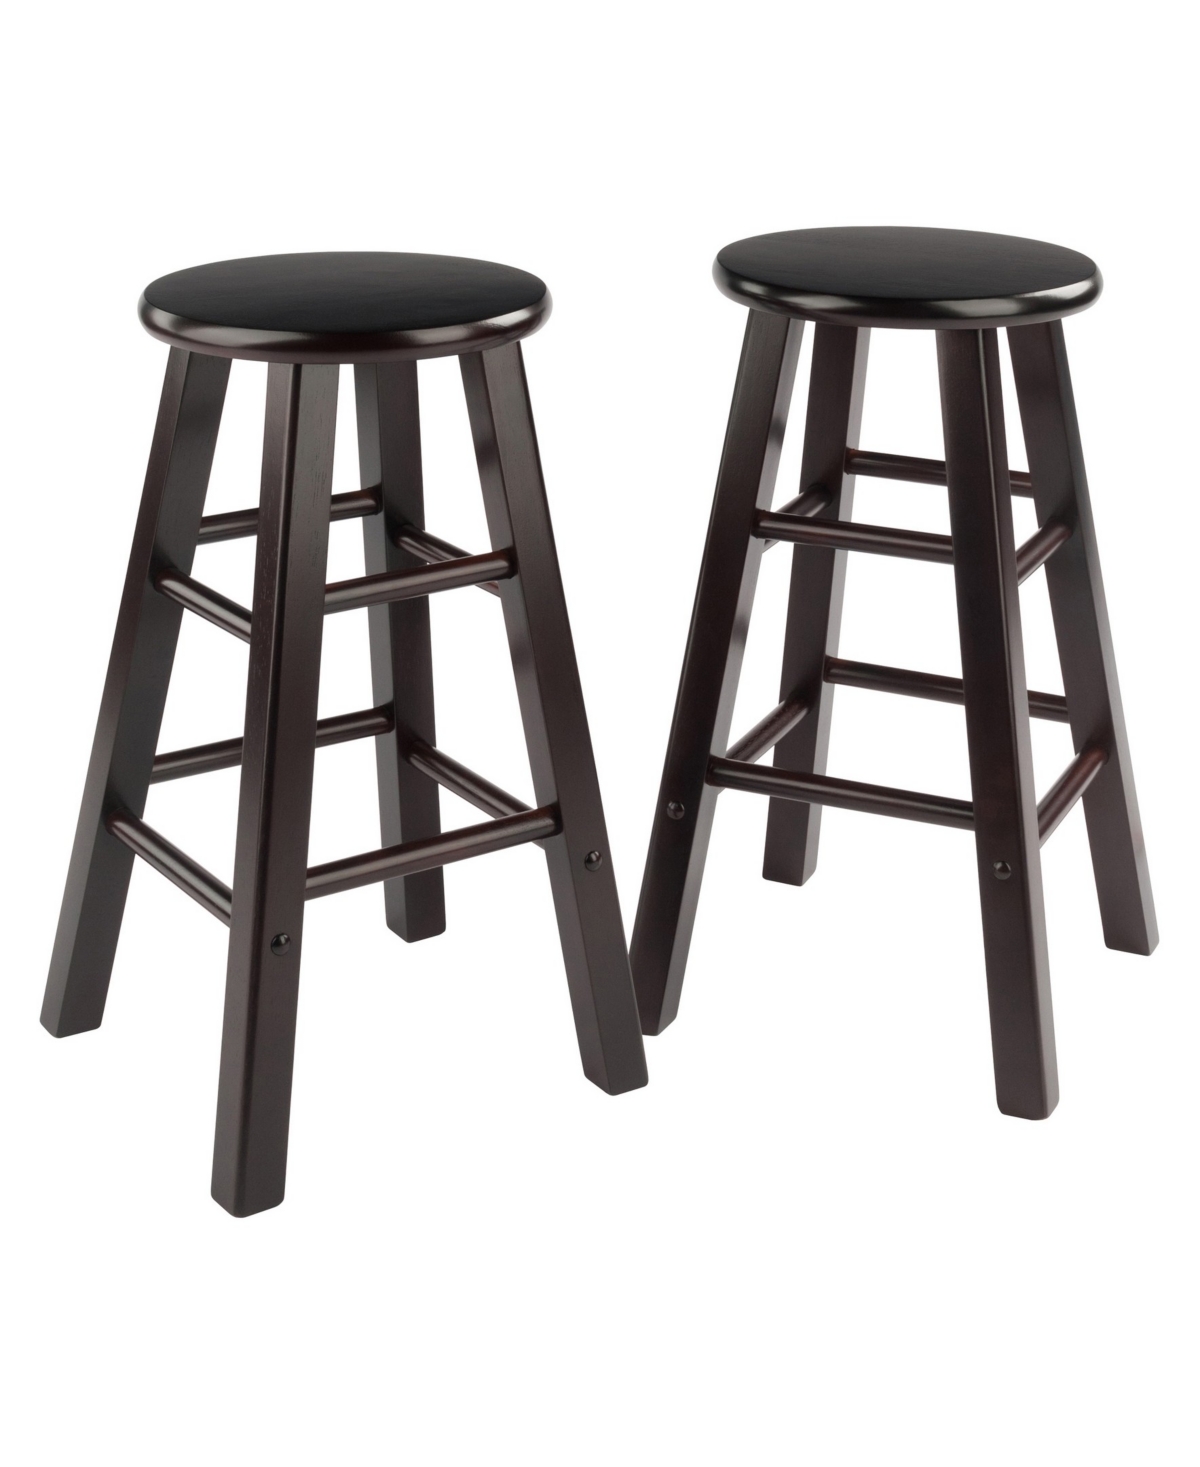 Winsome Element 2 Piece Wood Counter Stool Set In Espresso